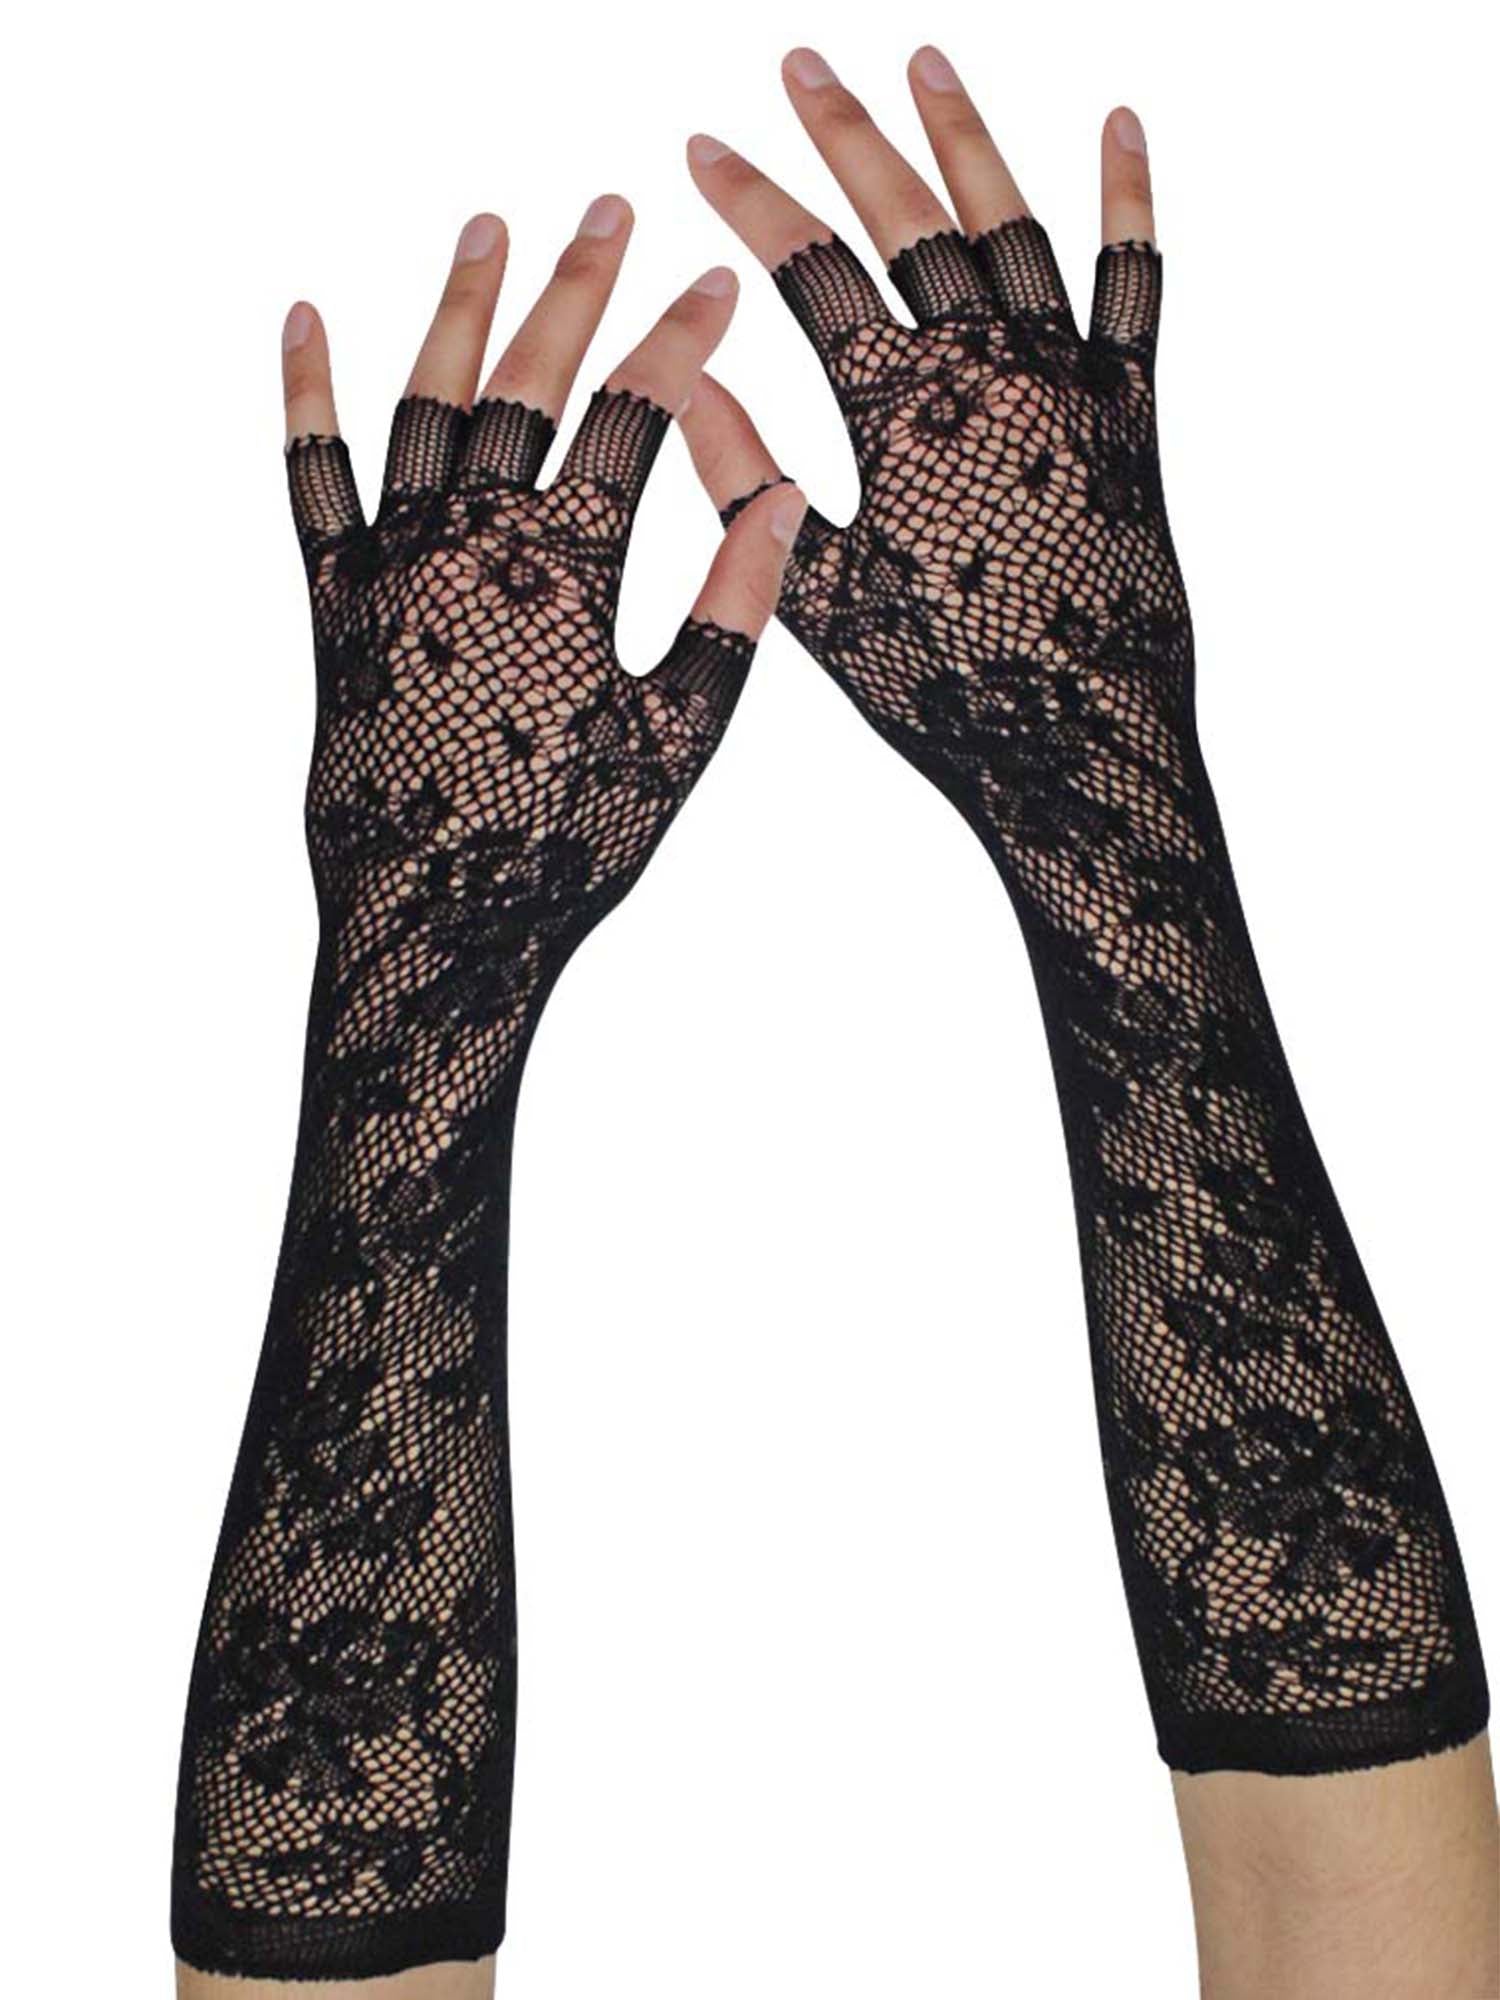 where can i find lace gloves